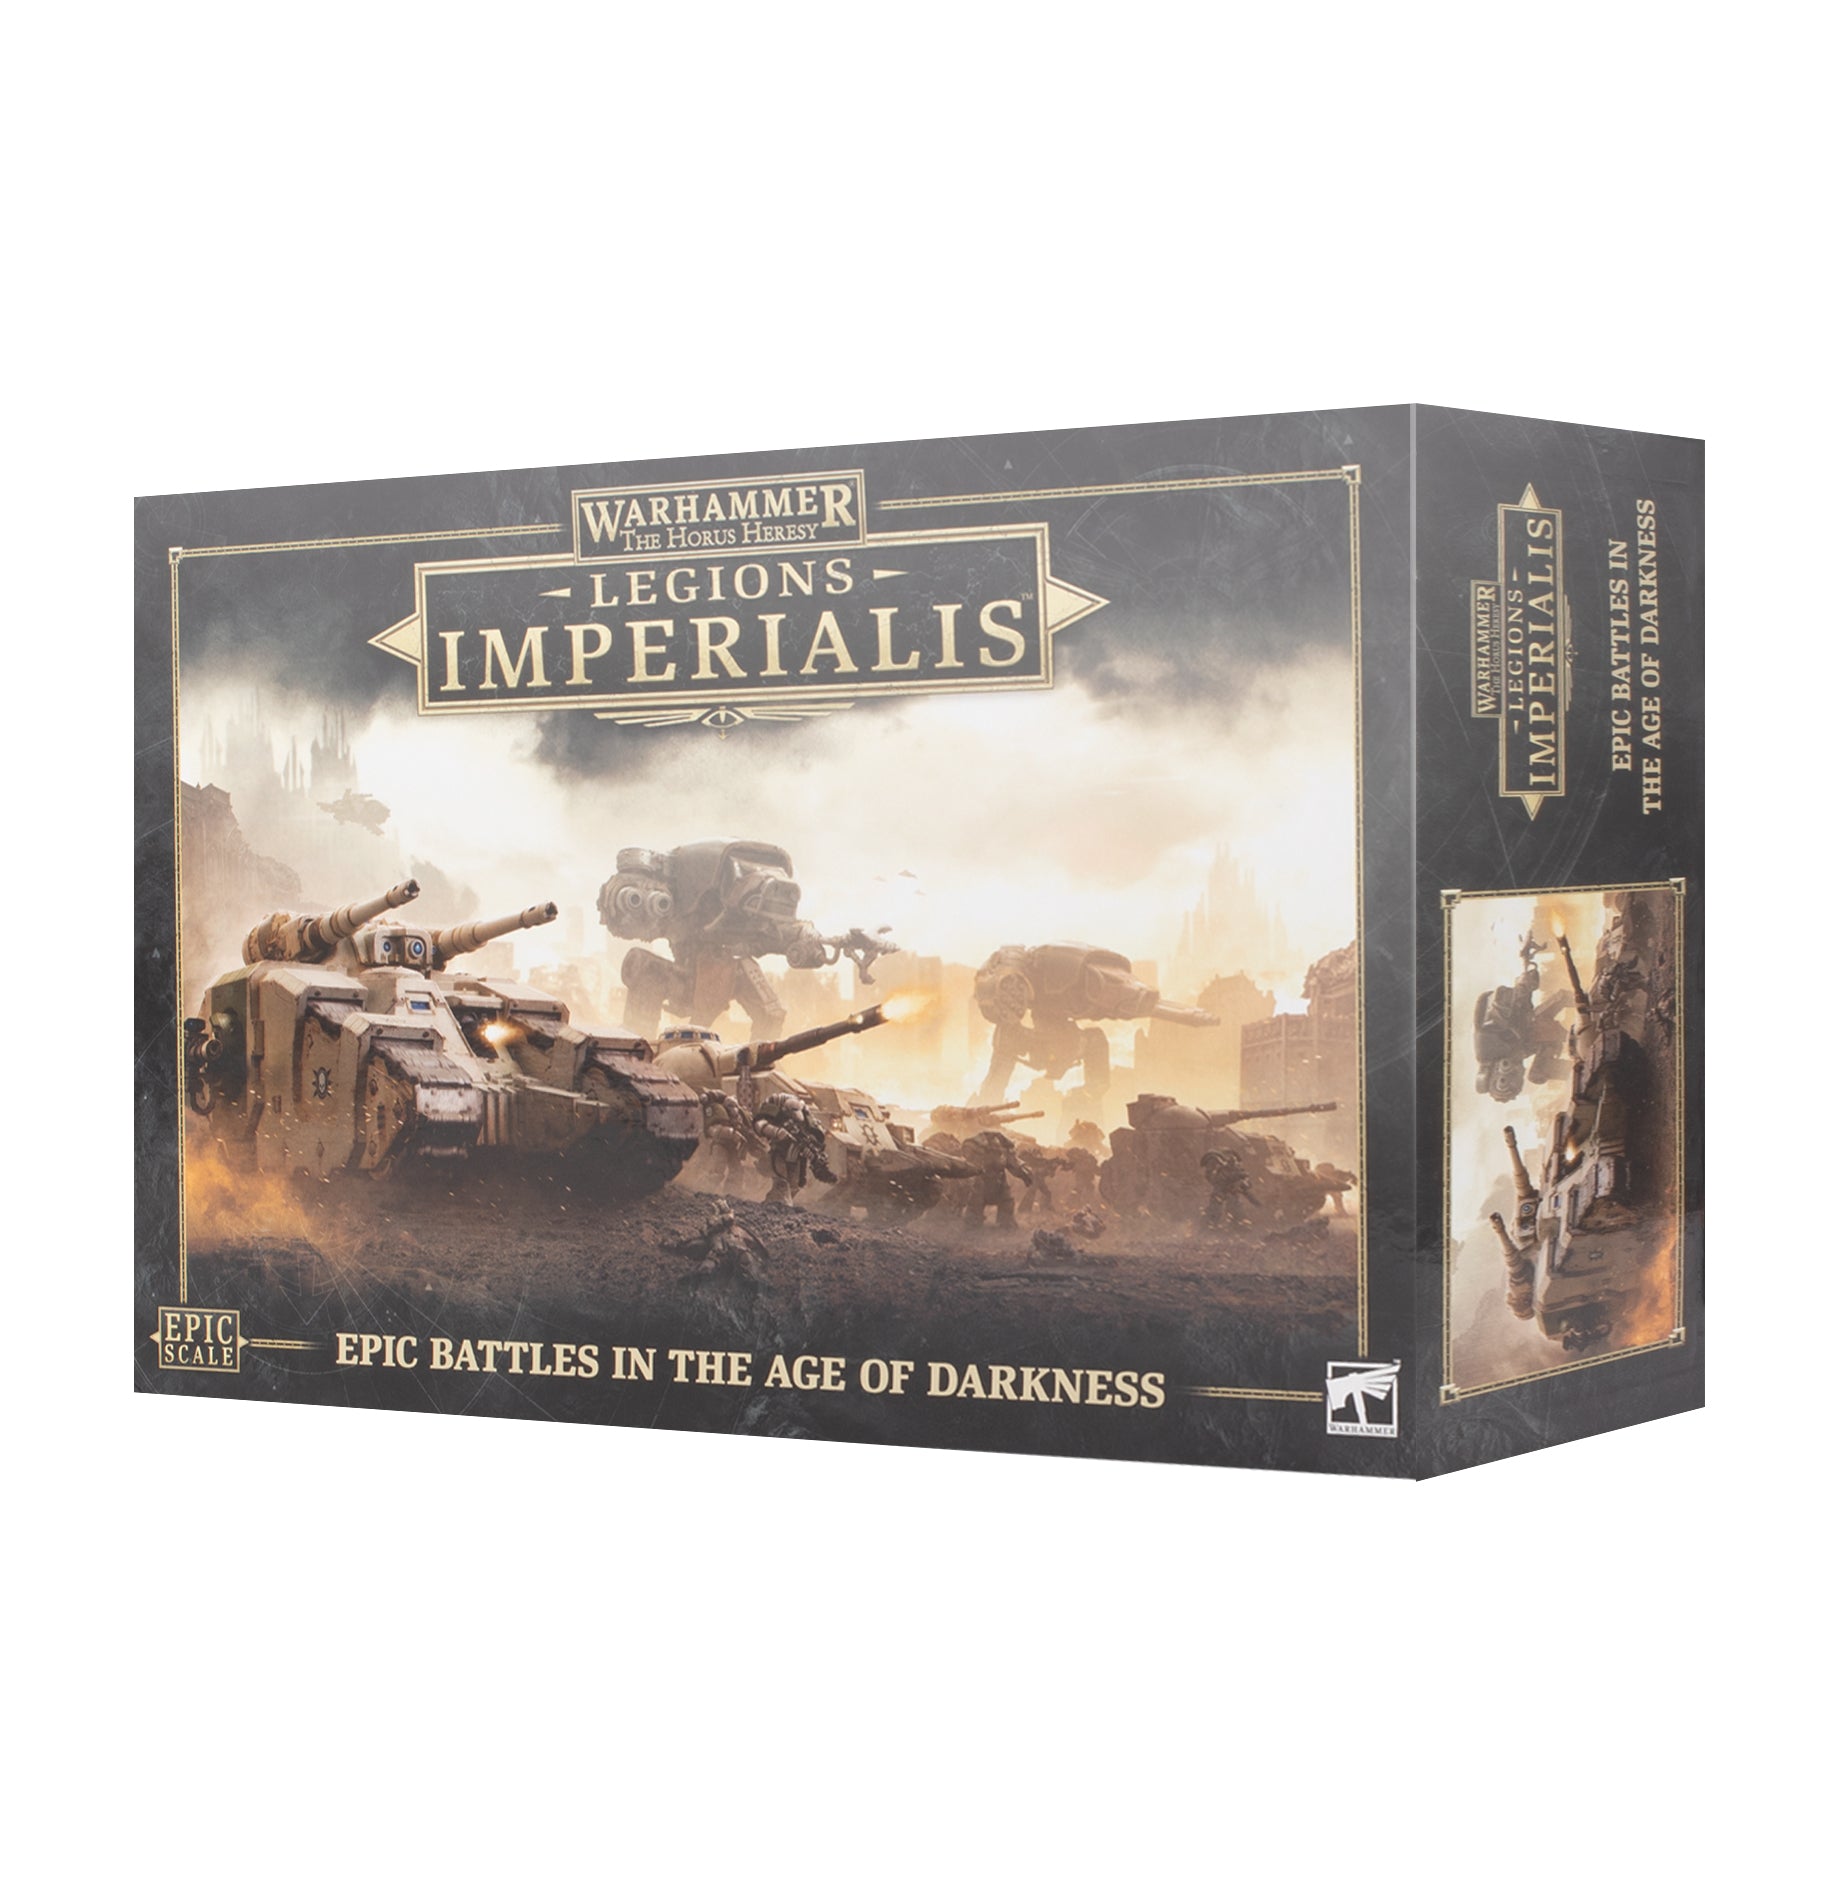 LEGIONS IMPERIALIS: THE HORUS HERESY Games Workshop Games Workshop    | Red Claw Gaming